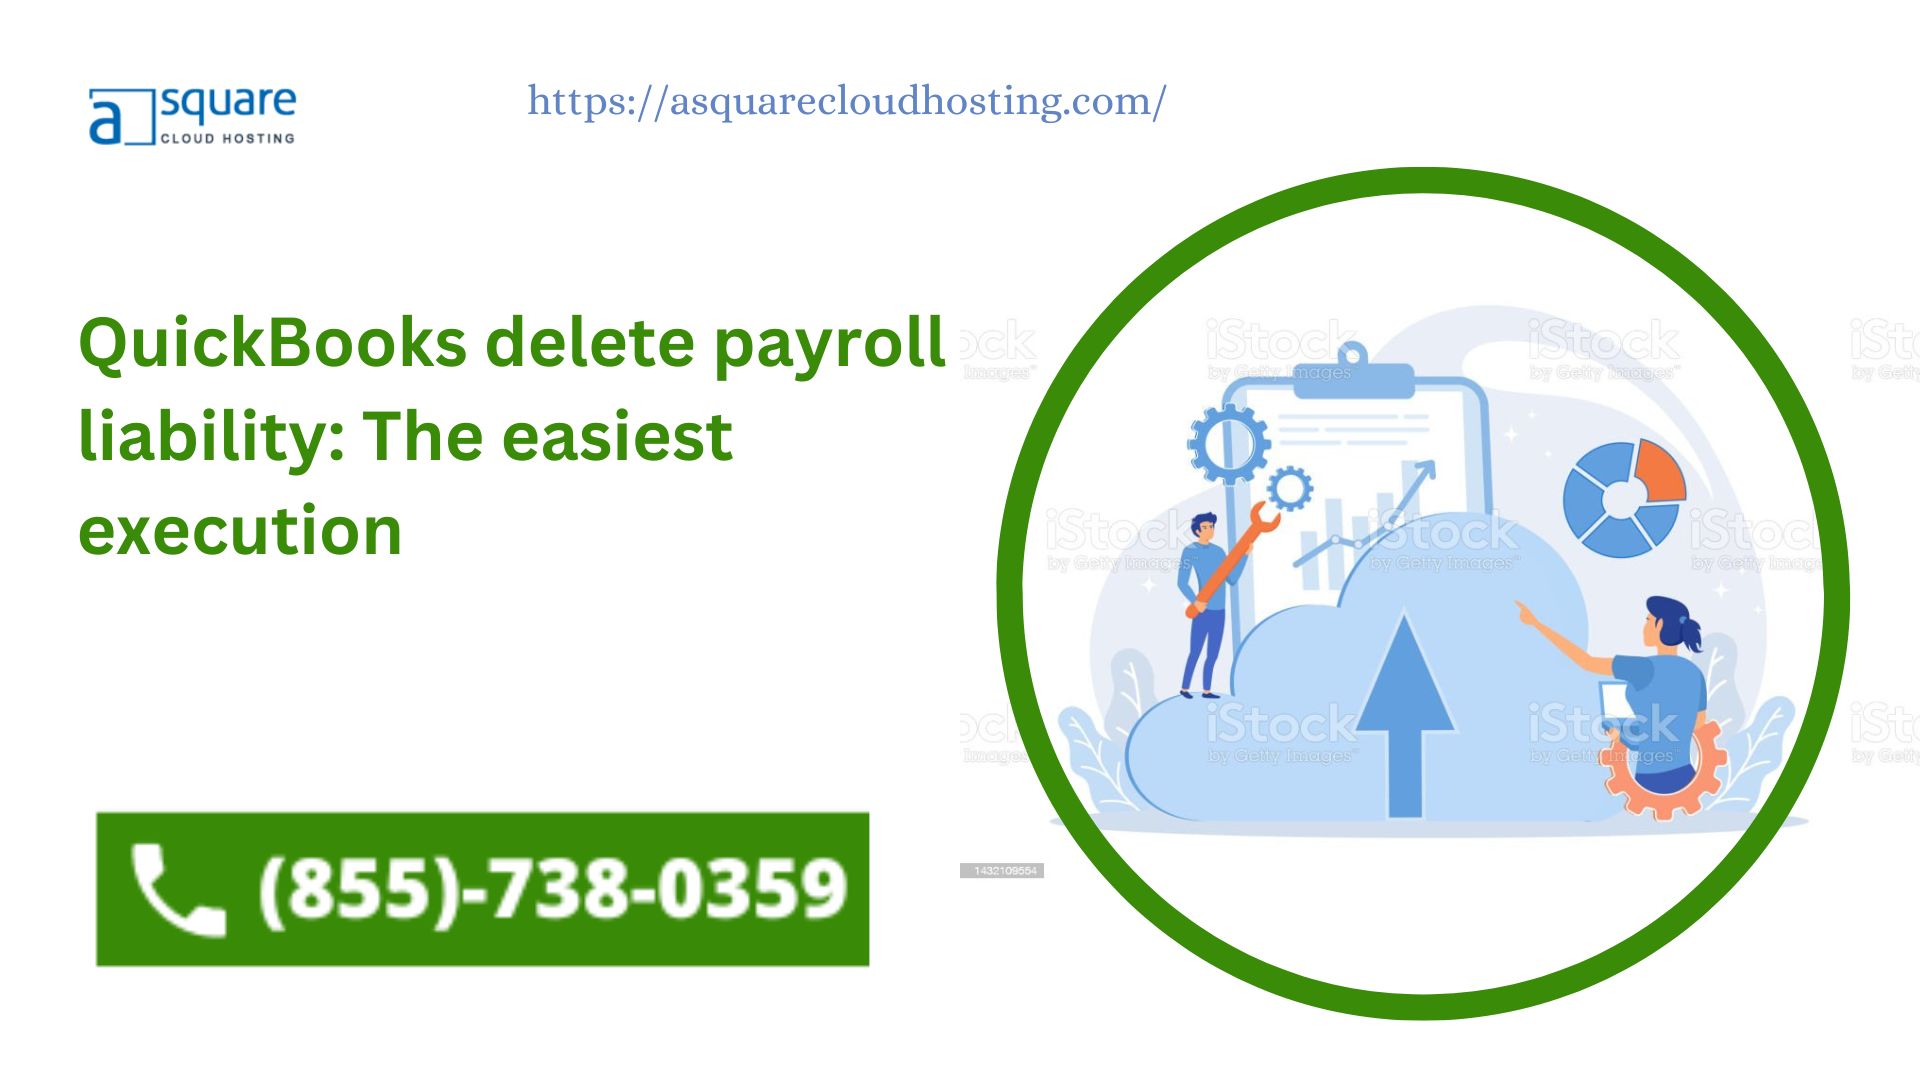 QuickBooks delete payroll liability: The easiest execution